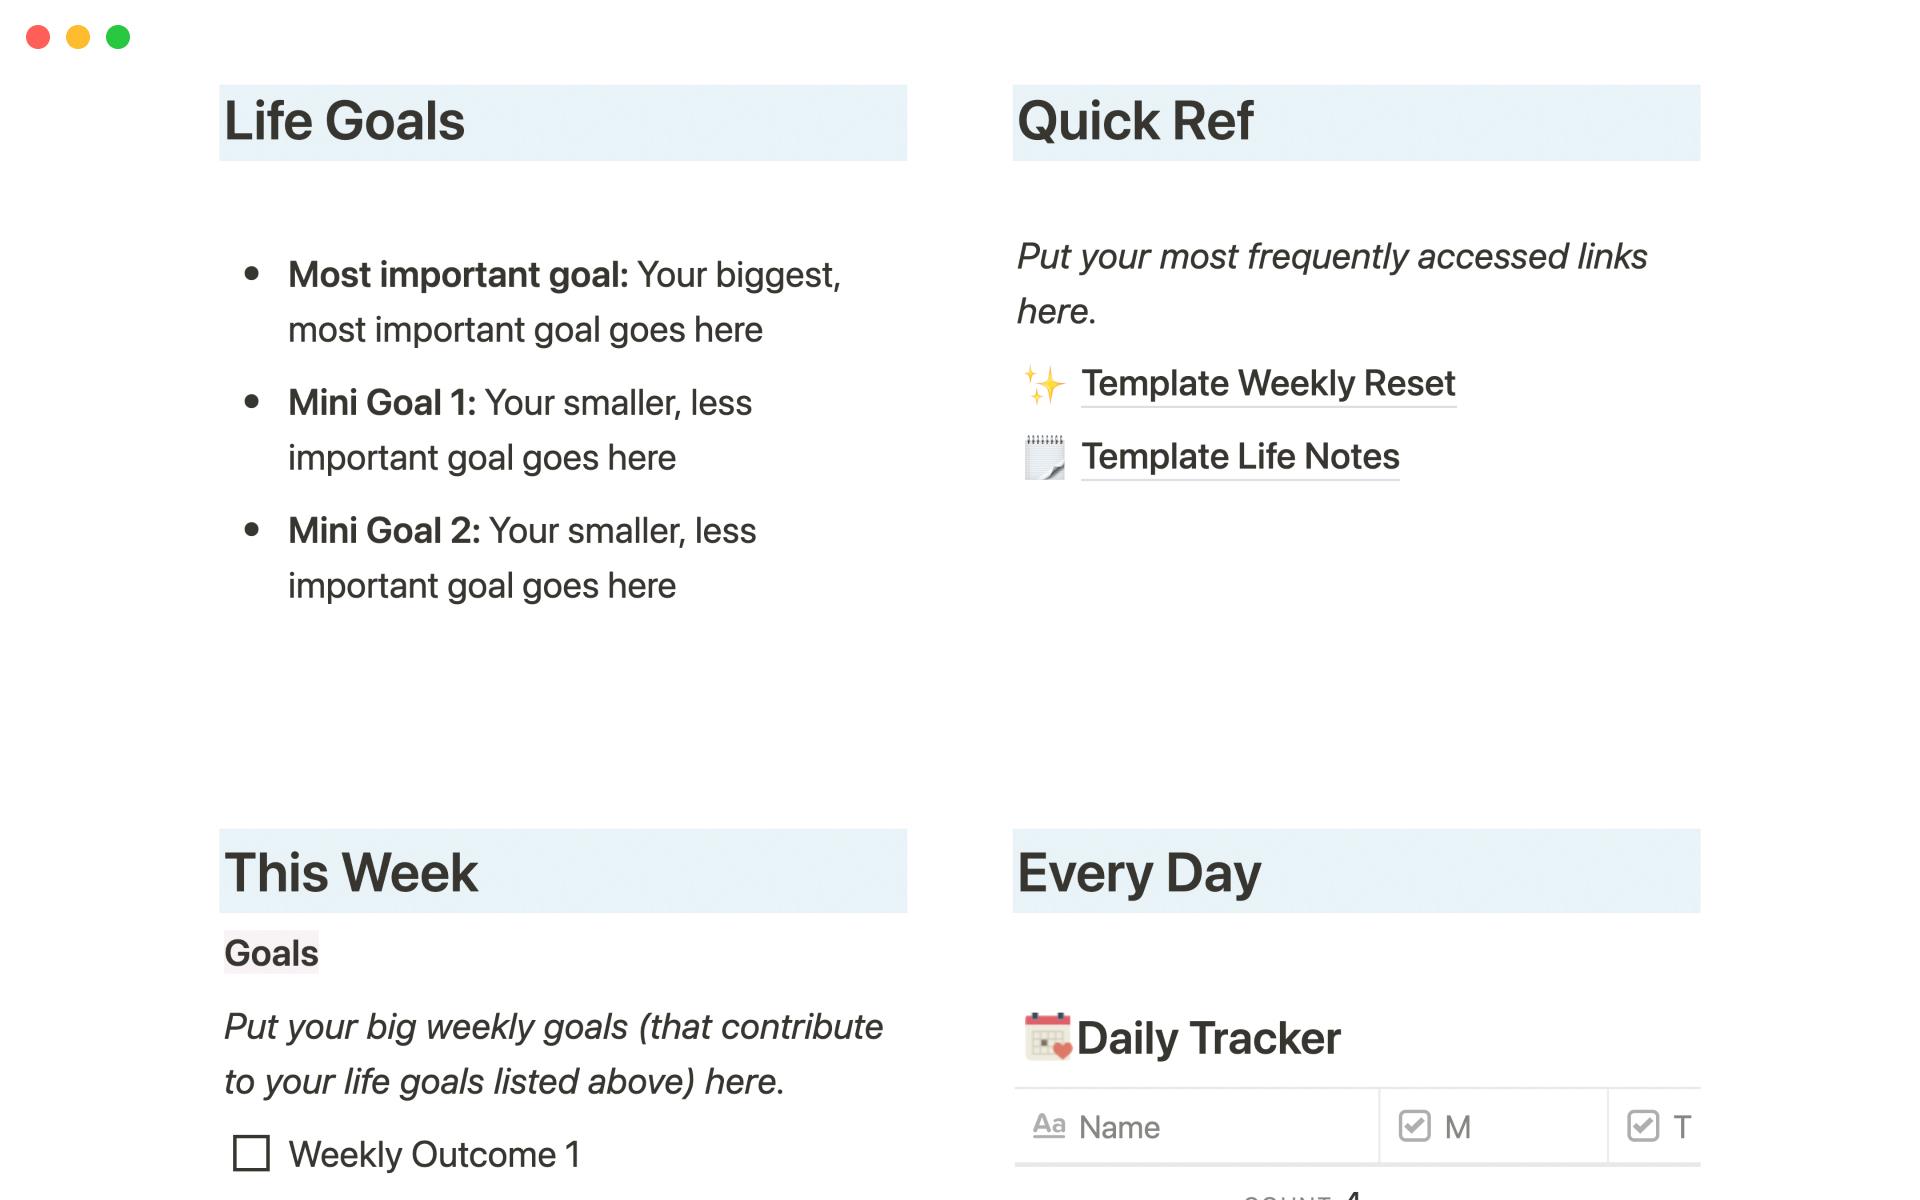 Life Dashboard provides a simple way to track everything in your life: life goals, quick refers, weekly goals, daily tracker, or other things important.